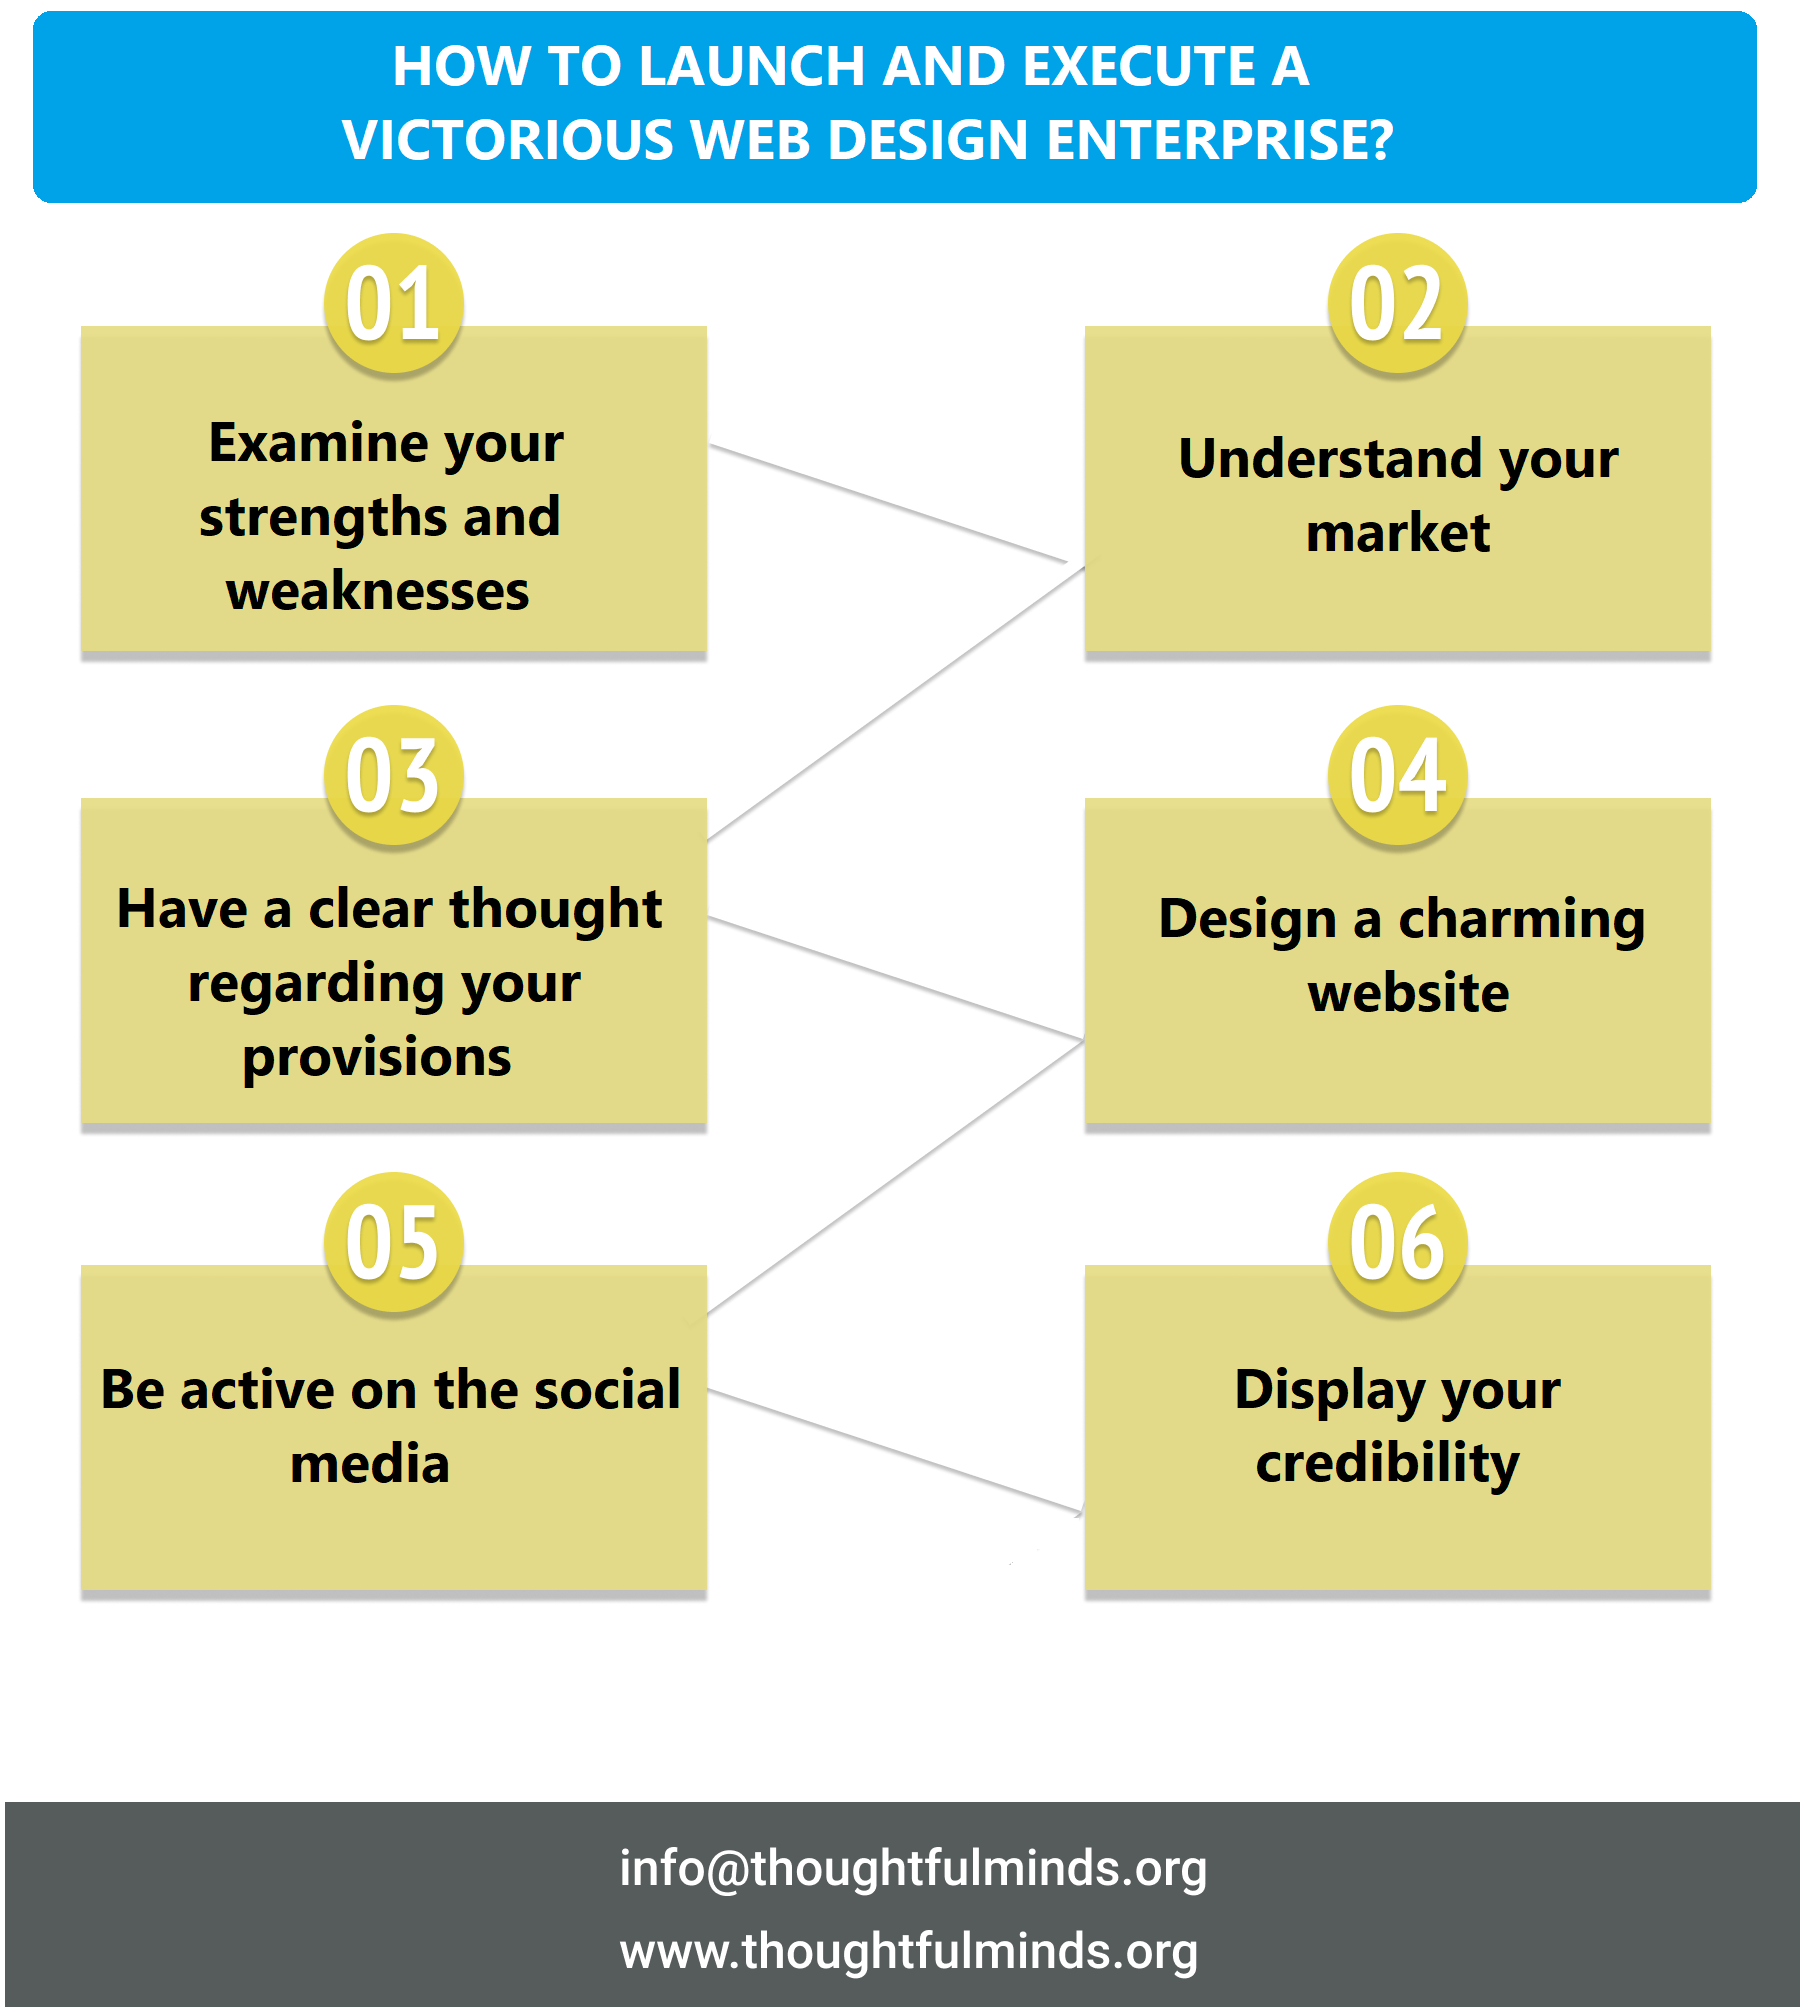 Infographic On How To Launch And Execute A Victorious Web Design Enterprise - ThoughtfulMinds